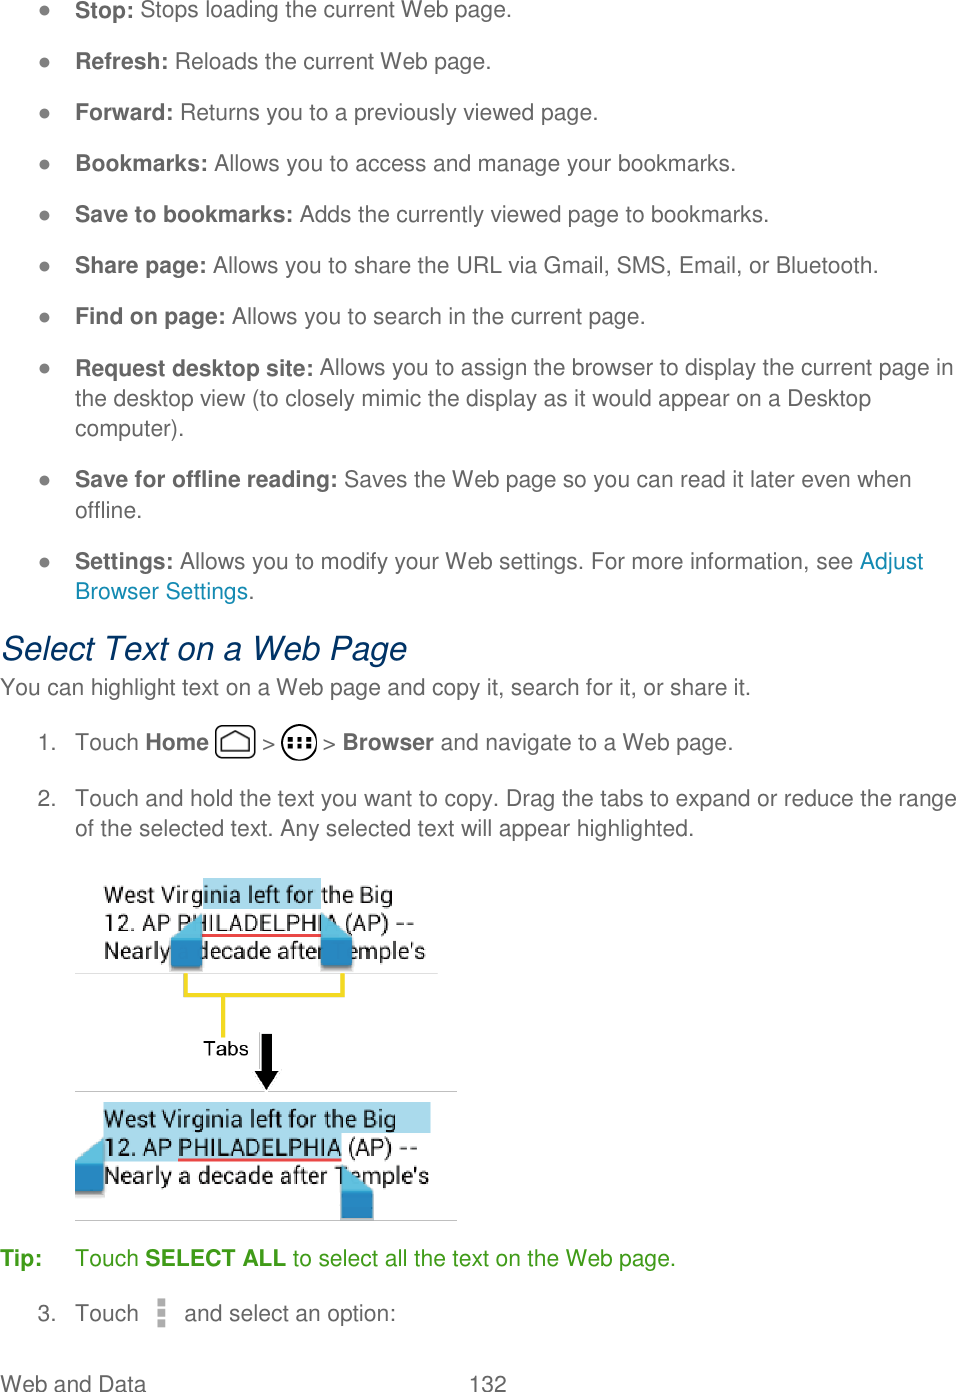 Web and Data  132   ● Stop: Stops loading the current Web page. ● Refresh: Reloads the current Web page. ● Forward: Returns you to a previously viewed page. ● Bookmarks: Allows you to access and manage your bookmarks.  ● Save to bookmarks: Adds the currently viewed page to bookmarks. ● Share page: Allows you to share the URL via Gmail, SMS, Email, or Bluetooth.  ● Find on page: Allows you to search in the current page.  ● Request desktop site: Allows you to assign the browser to display the current page in the desktop view (to closely mimic the display as it would appear on a Desktop computer).  ● Save for offline reading: Saves the Web page so you can read it later even when offline.  ● Settings: Allows you to modify your Web settings. For more information, see Adjust Browser Settings.  Select Text on a Web Page You can highlight text on a Web page and copy it, search for it, or share it. 1.  Touch Home   &gt;   &gt; Browser and navigate to a Web page. 2.  Touch and hold the text you want to copy. Drag the tabs to expand or reduce the range of the selected text. Any selected text will appear highlighted.  Tip:  Touch SELECT ALL to select all the text on the Web page. 3.  Touch   and select an option: 